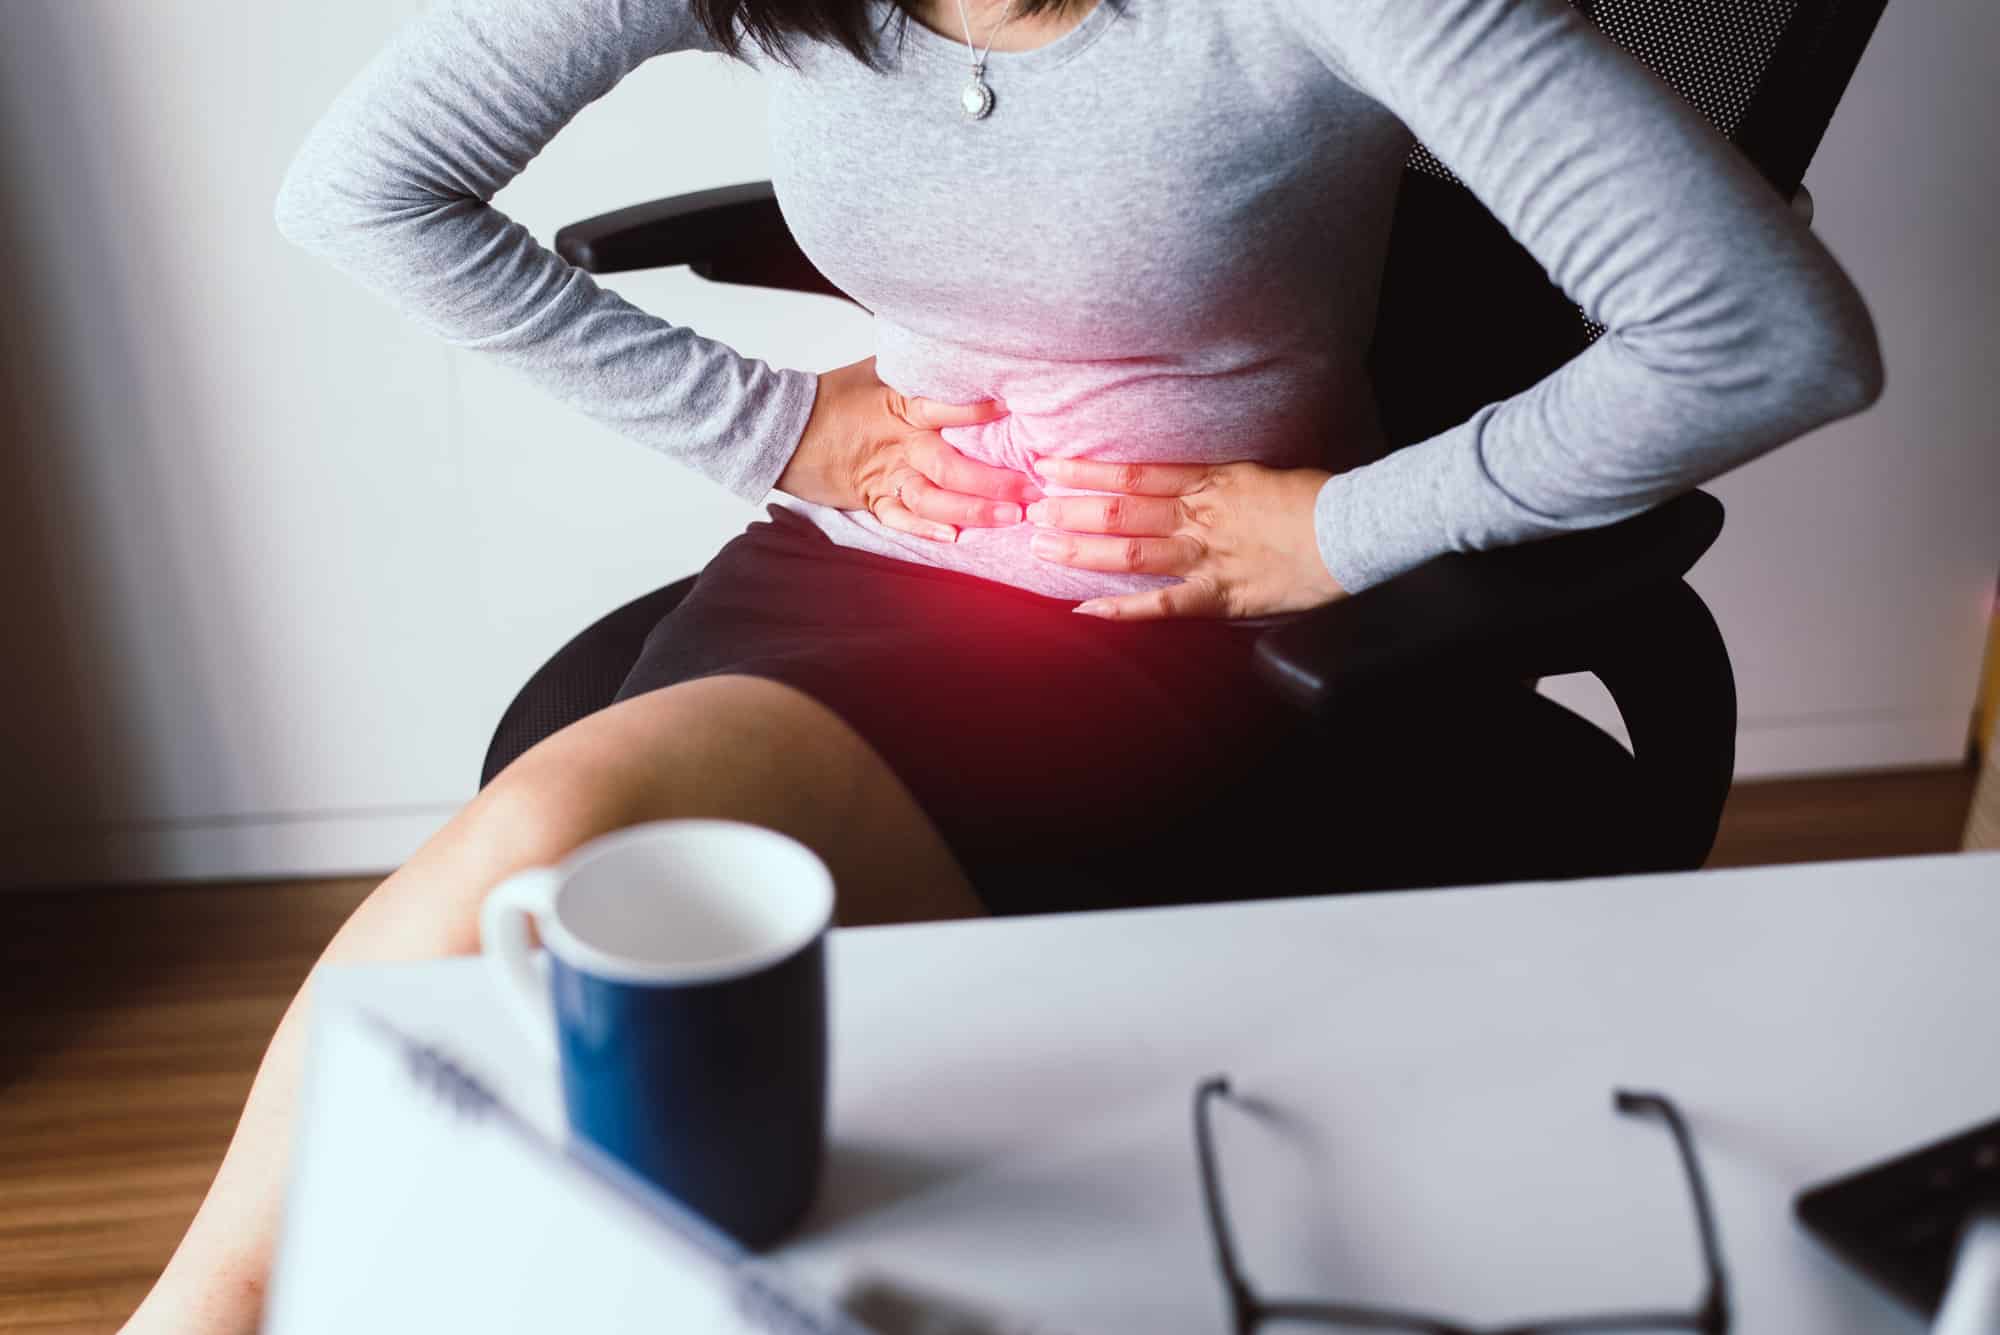 Woman having painful stomach ache during working from home,Female suffering from abdominal pain,Period cramps,Hands squeezing belly,Stomach pain